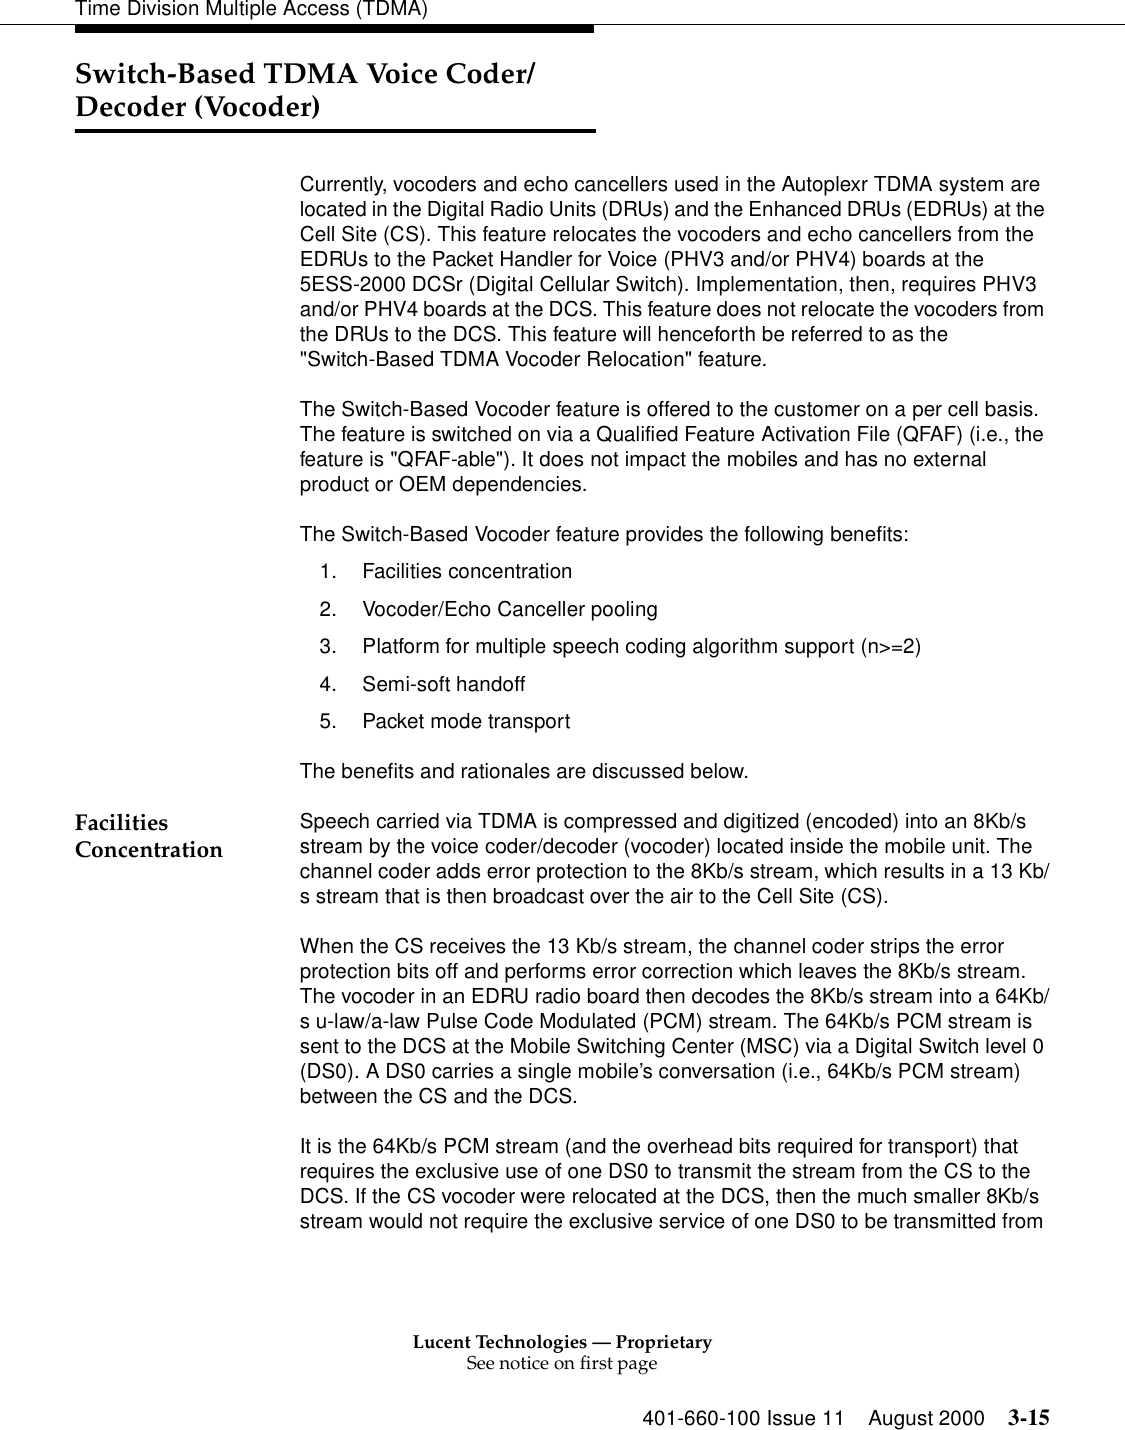 Lucent Technologies — ProprietarySee notice on first page401-660-100 Issue 11 August 2000 3-15Time Division Multiple Access (TDMA)Switch-Based TDMA Voice Coder/ Decoder (Vocoder)Currently, vocoders and echo cancellers used in the Autoplexr TDMA system are located in the Digital Radio Units (DRUs) and the Enhanced DRUs (EDRUs) at the Cell Site (CS). This feature relocates the vocoders and echo cancellers from the EDRUs to the Packet Handler for Voice (PHV3 and/or PHV4) boards at the 5ESS-2000 DCSr (Digital Cellular Switch). Implementation, then, requires PHV3 and/or PHV4 boards at the DCS. This feature does not relocate the vocoders from the DRUs to the DCS. This feature will henceforth be referred to as the &quot;Switch-Based TDMA Vocoder Relocation&quot; feature. The Switch-Based Vocoder feature is offered to the customer on a per cell basis. The feature is switched on via a Qualified Feature Activation File (QFAF) (i.e., the feature is &quot;QFAF-able&quot;). It does not impact the mobiles and has no external product or OEM dependencies. The Switch-Based Vocoder feature provides the following benefits: 1. Facilities concentration2. Vocoder/Echo Canceller pooling3. Platform for multiple speech coding algorithm support (n&gt;=2)4. Semi-soft handoff5. Packet mode transportThe benefits and rationales are discussed below. Facilities Concentration Speech carried via TDMA is compressed and digitized (encoded) into an 8Kb/s stream by the voice coder/decoder (vocoder) located inside the mobile unit. The channel coder adds error protection to the 8Kb/s stream, which results in a 13 Kb/s stream that is then broadcast over the air to the Cell Site (CS). When the CS receives the 13 Kb/s stream, the channel coder strips the error protection bits off and performs error correction which leaves the 8Kb/s stream. The vocoder in an EDRU radio board then decodes the 8Kb/s stream into a 64Kb/s u-law/a-law Pulse Code Modulated (PCM) stream. The 64Kb/s PCM stream is sent to the DCS at the Mobile Switching Center (MSC) via a Digital Switch level 0 (DS0). A DS0 carries a single mobile’s conversation (i.e., 64Kb/s PCM stream) between the CS and the DCS. It is the 64Kb/s PCM stream (and the overhead bits required for transport) that requires the exclusive use of one DS0 to transmit the stream from the CS to the DCS. If the CS vocoder were relocated at the DCS, then the much smaller 8Kb/s stream would not require the exclusive service of one DS0 to be transmitted from 